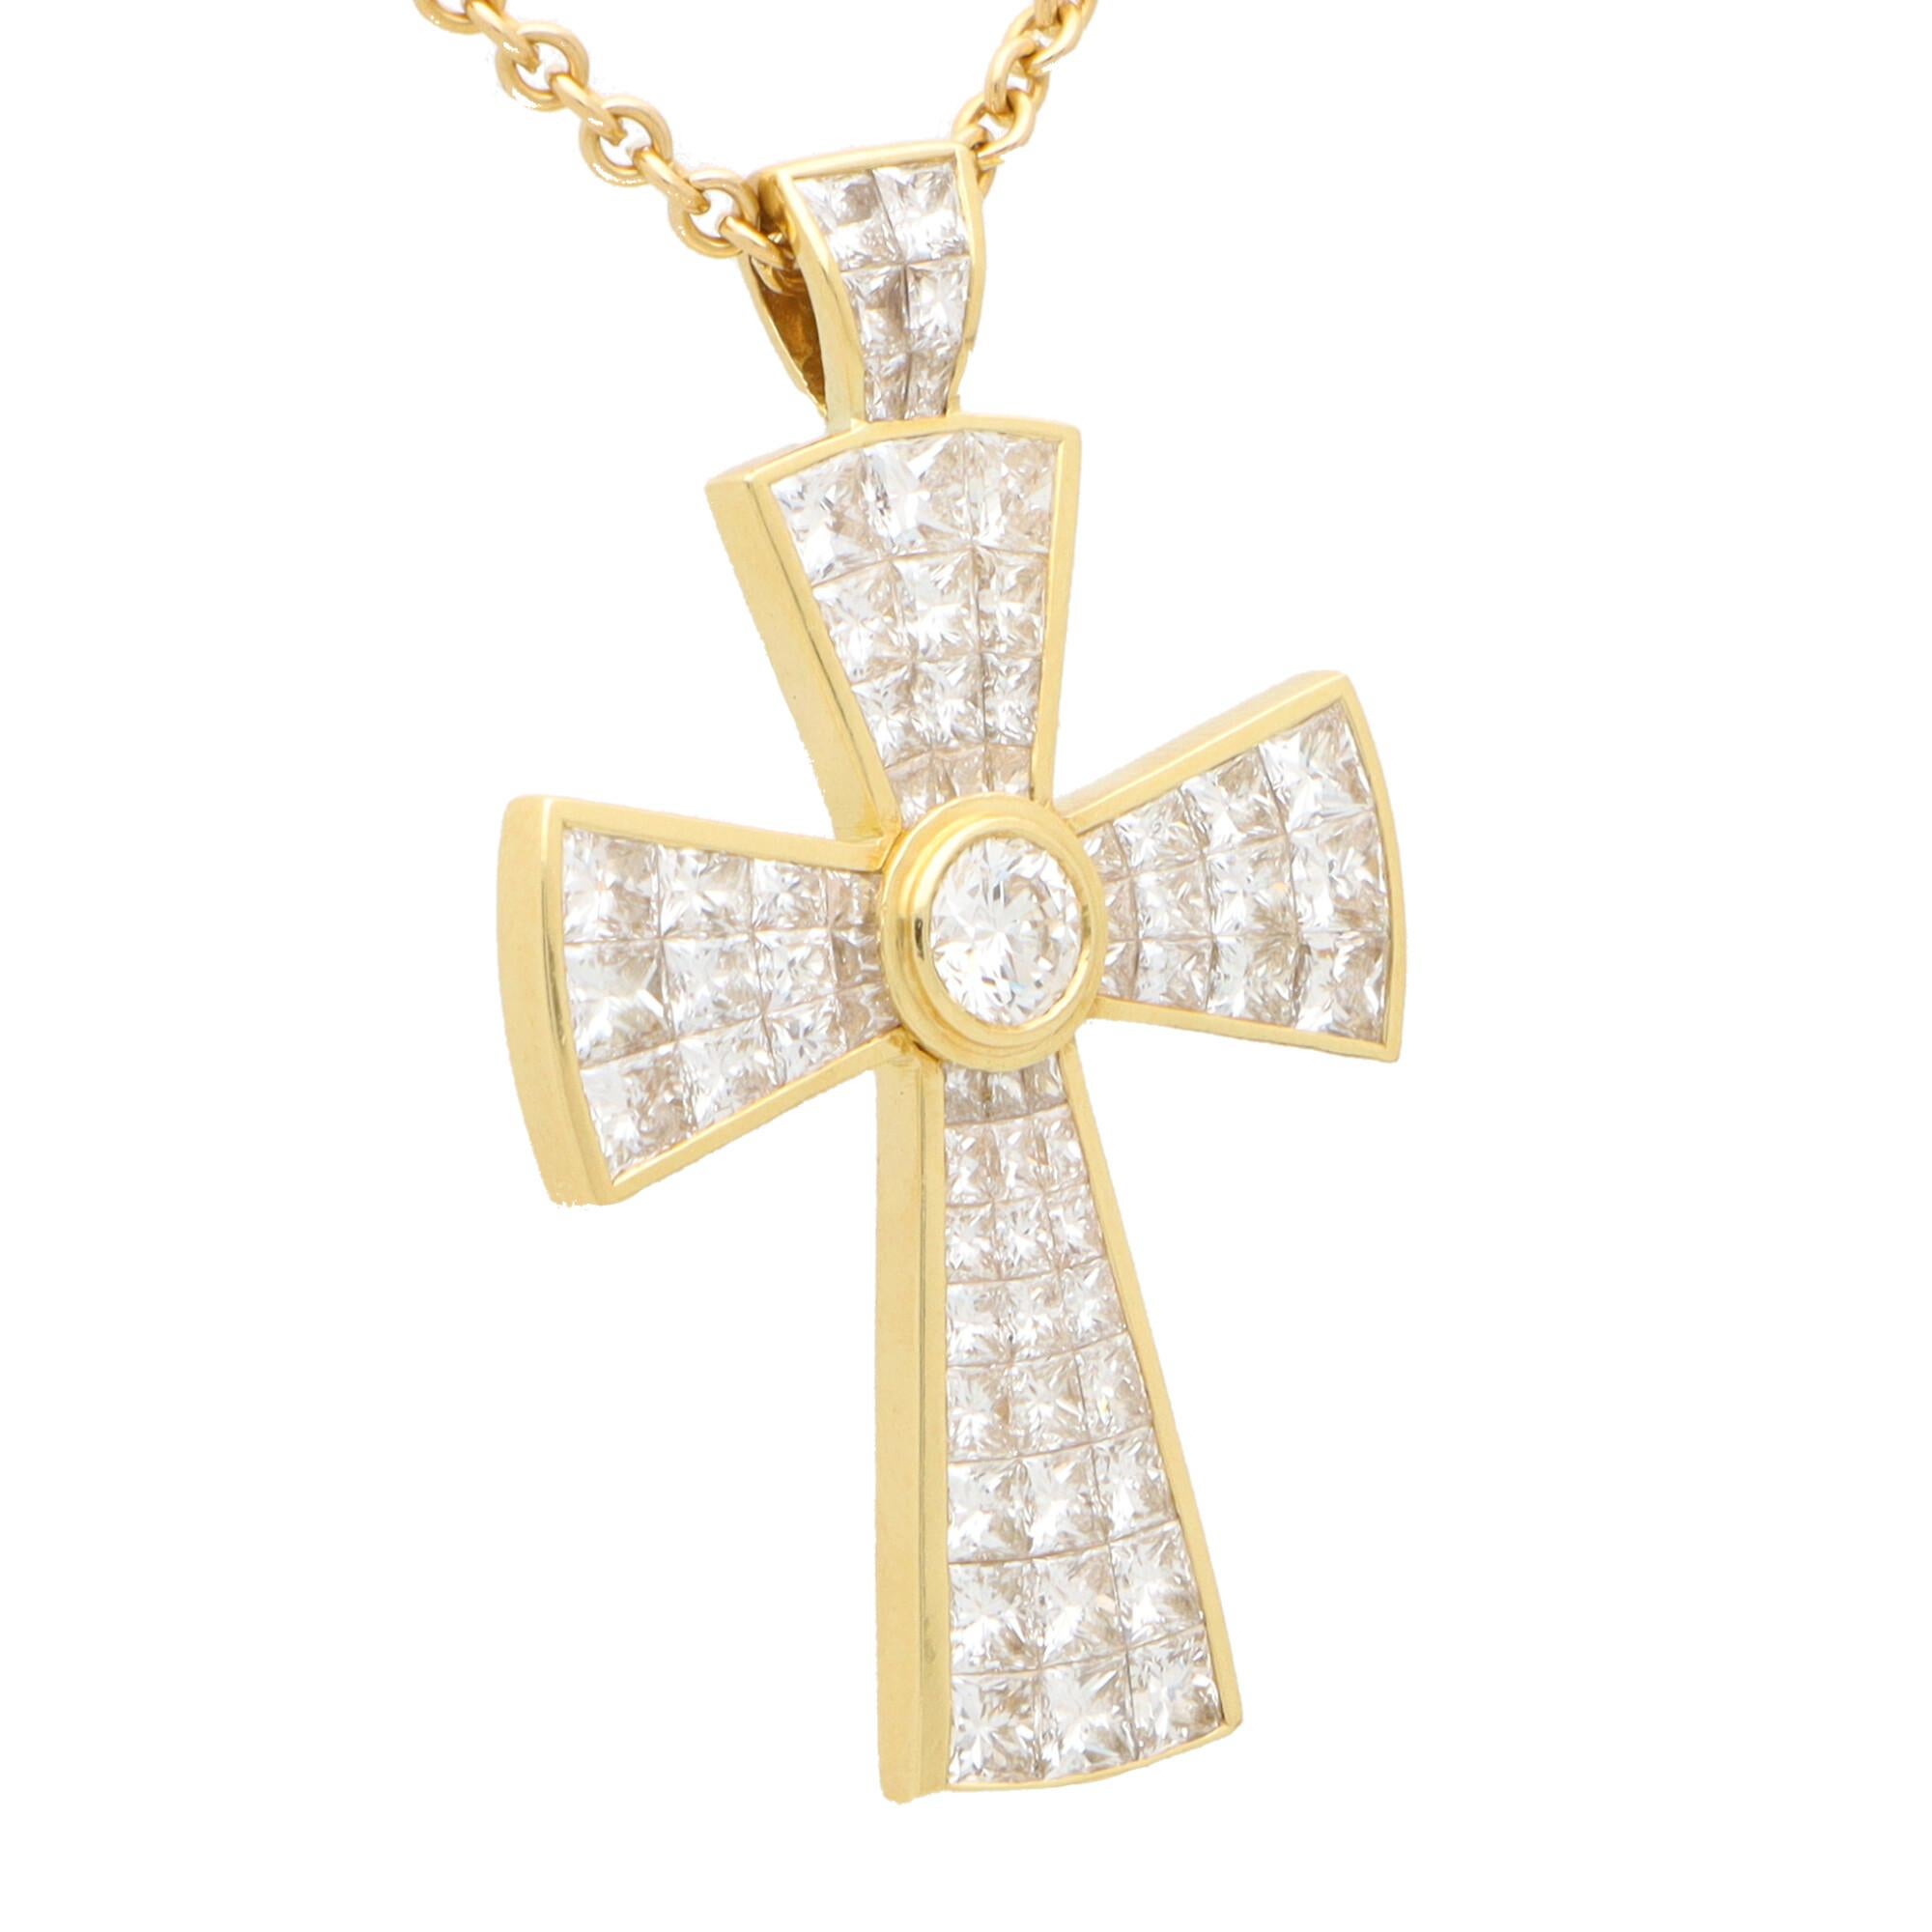 Round Cut Vintage Theo Fennell Diamond Cross Pendant Set in 18k Yellow Gold